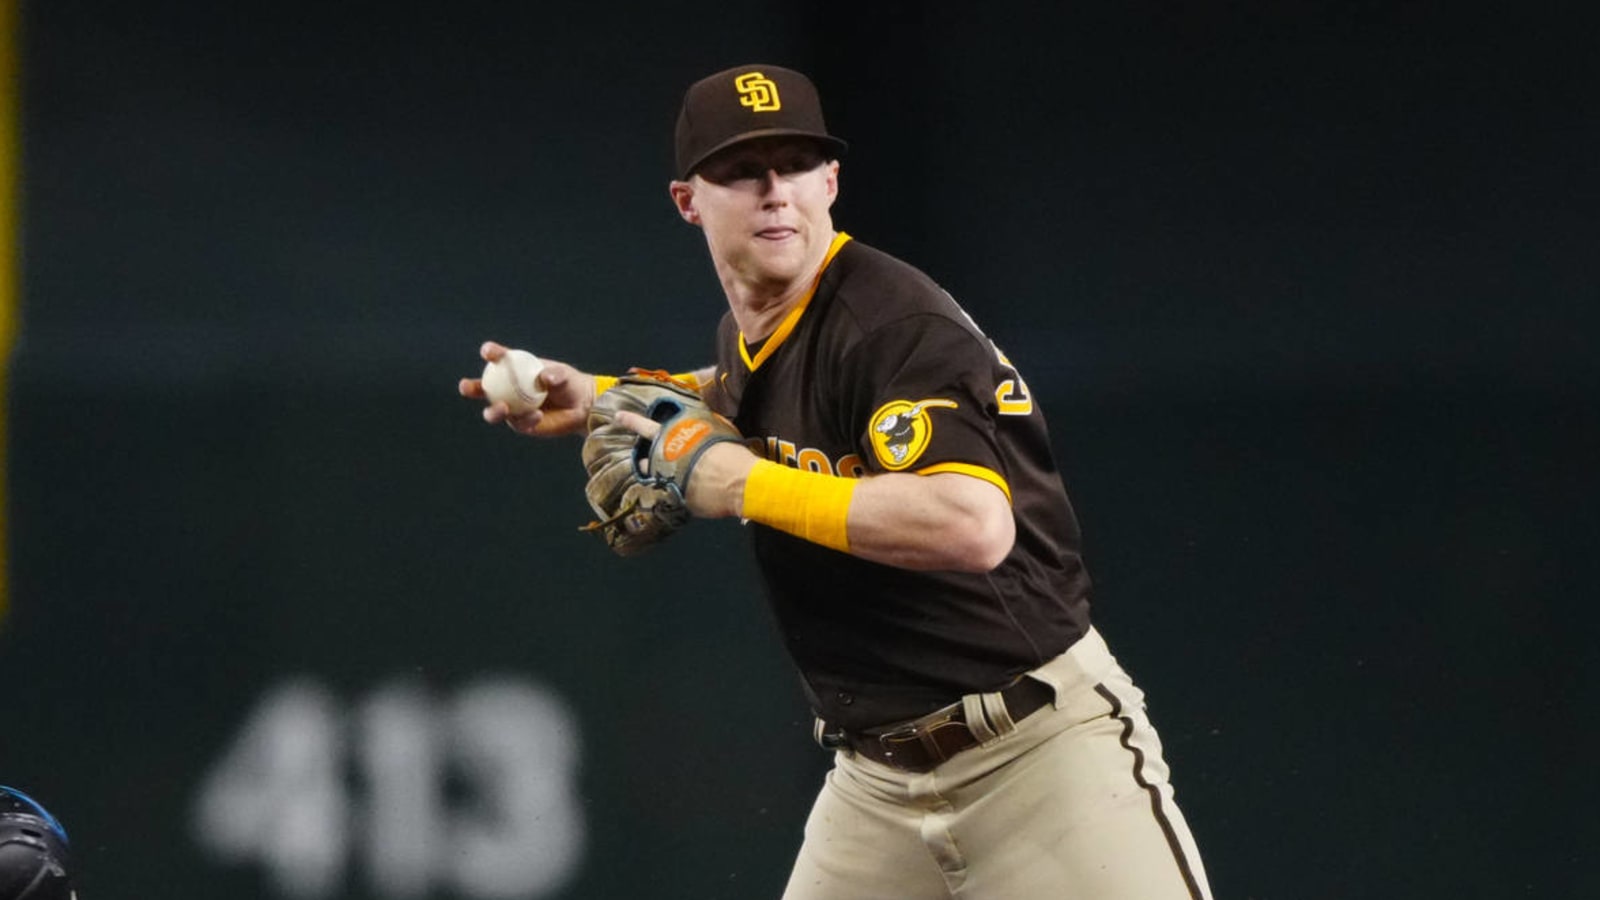 San Diego Padres 2B Jake Cronenworth Joins NL All-Star Roster - Gaslamp Ball